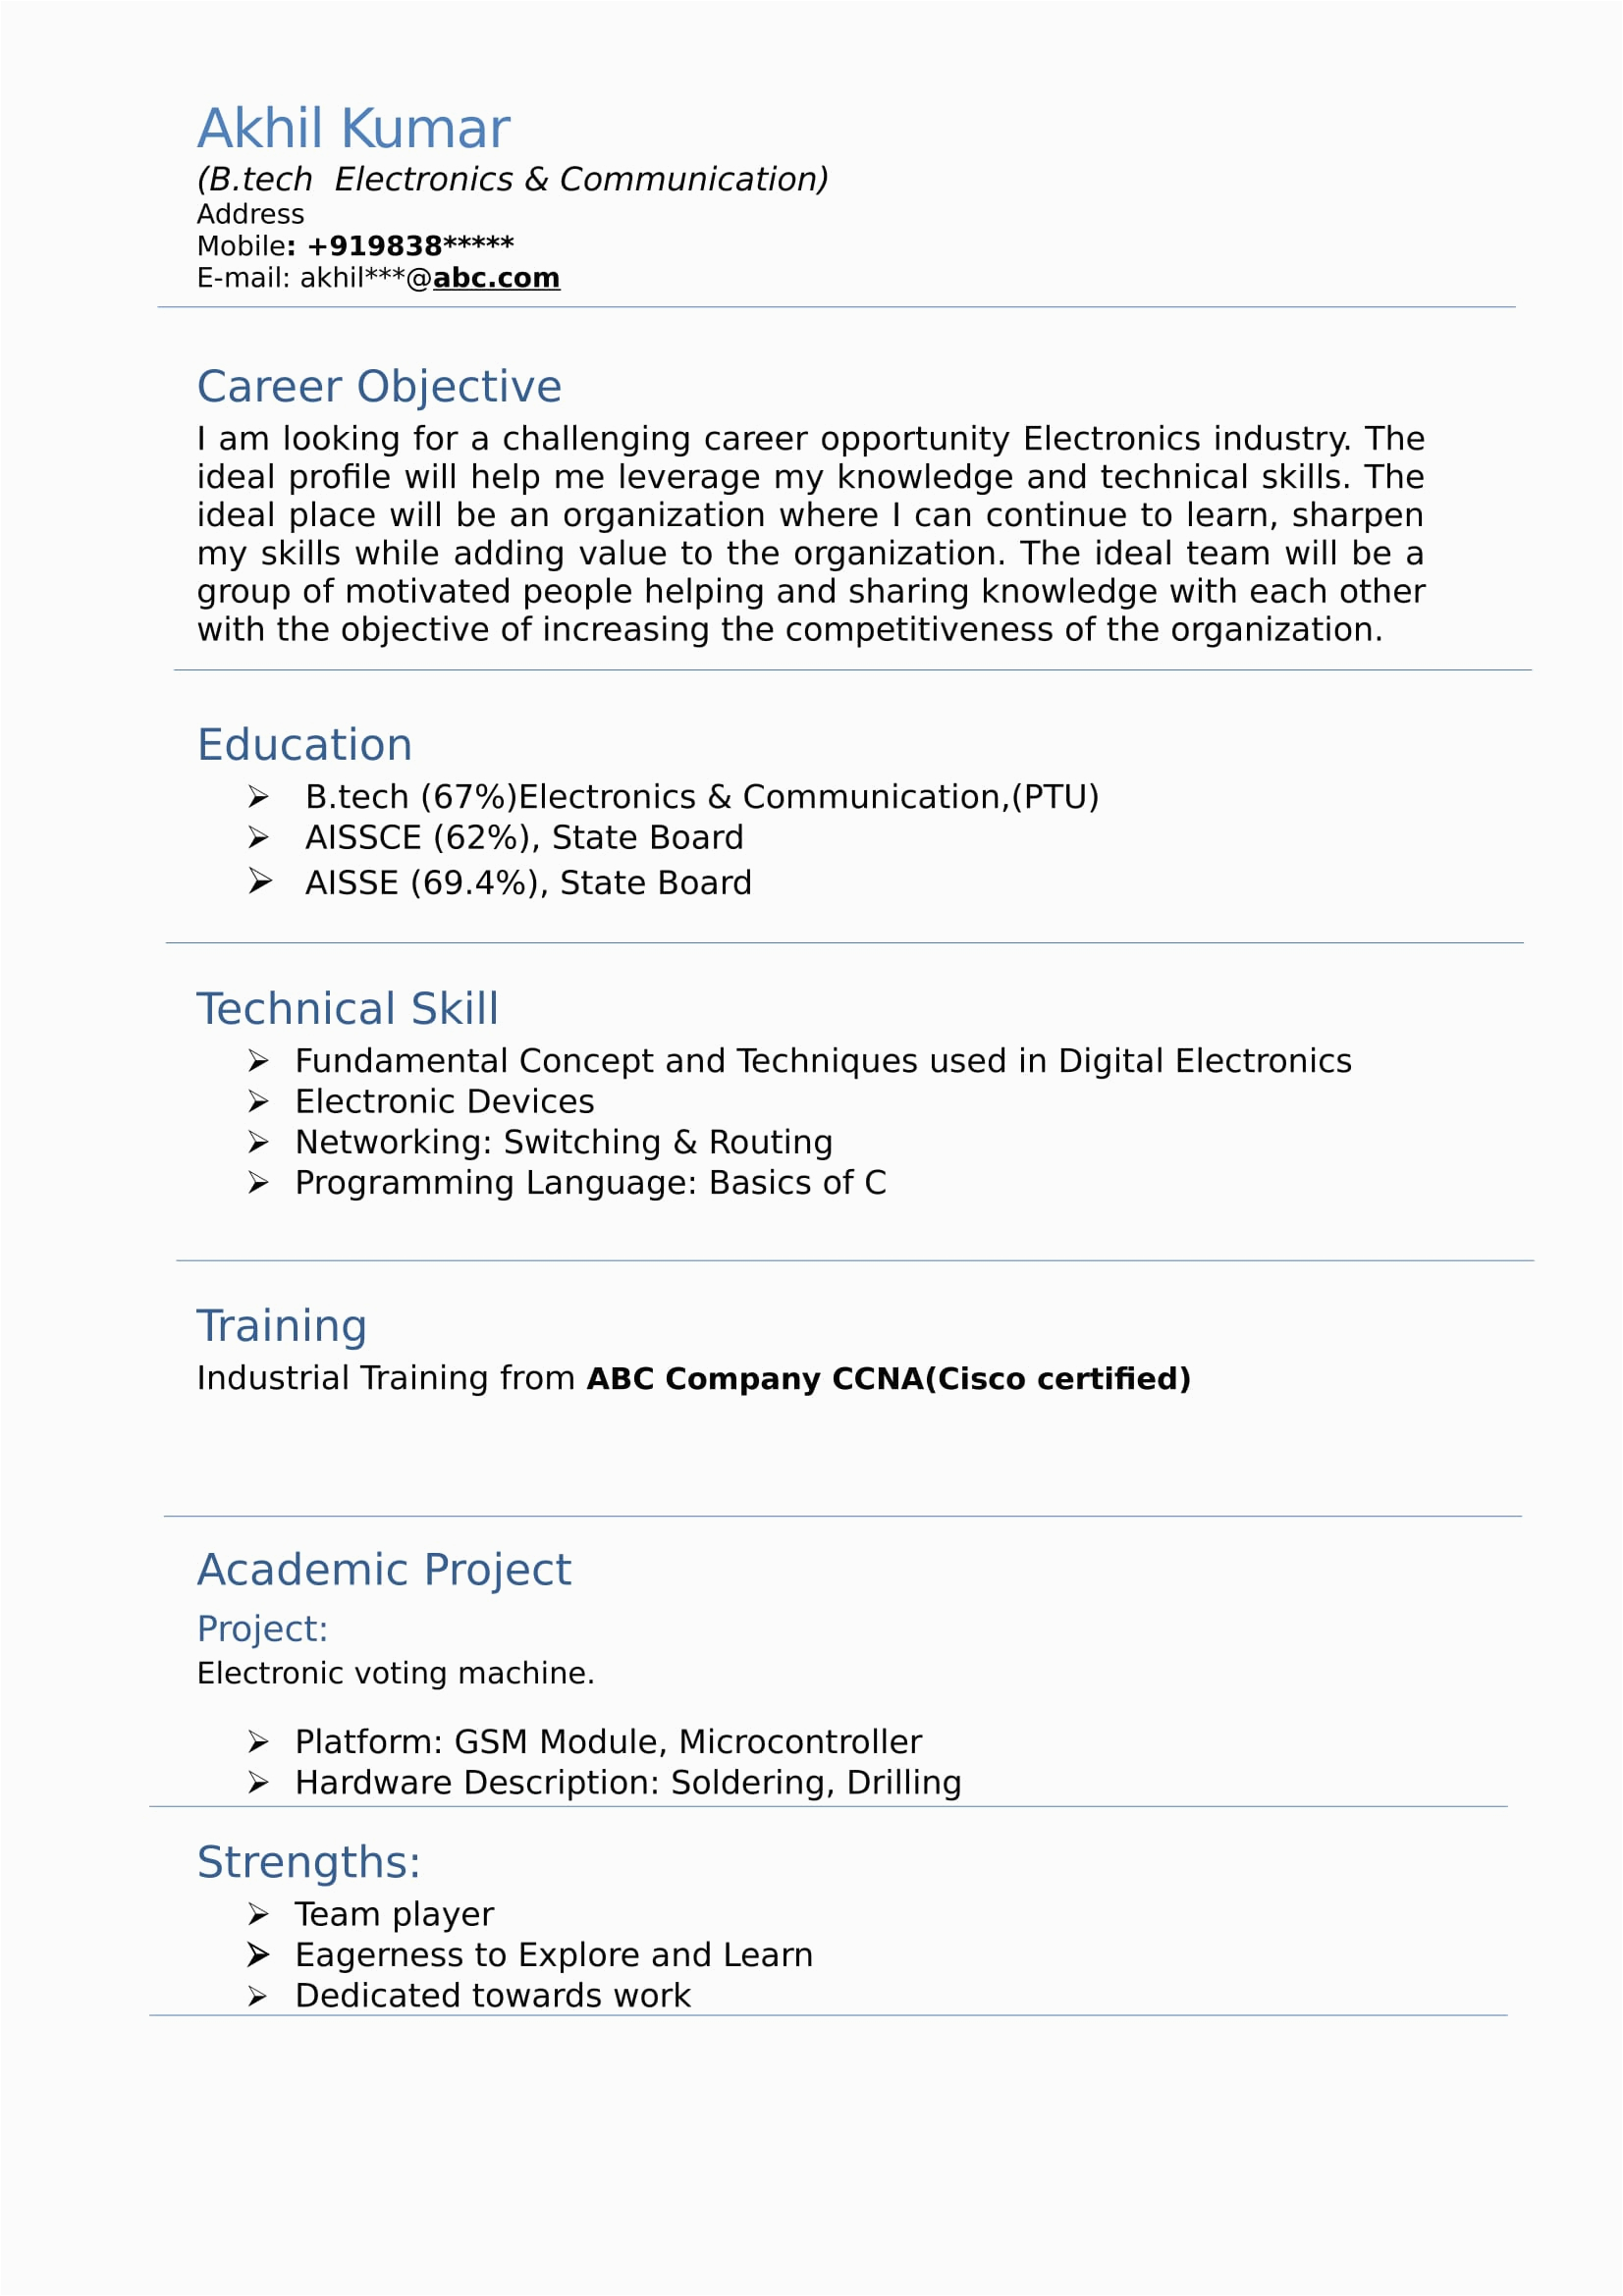 Resume Sample for Electronics and Communication Engineers Fresher Pdf Resume Templates for Electronics and Munication